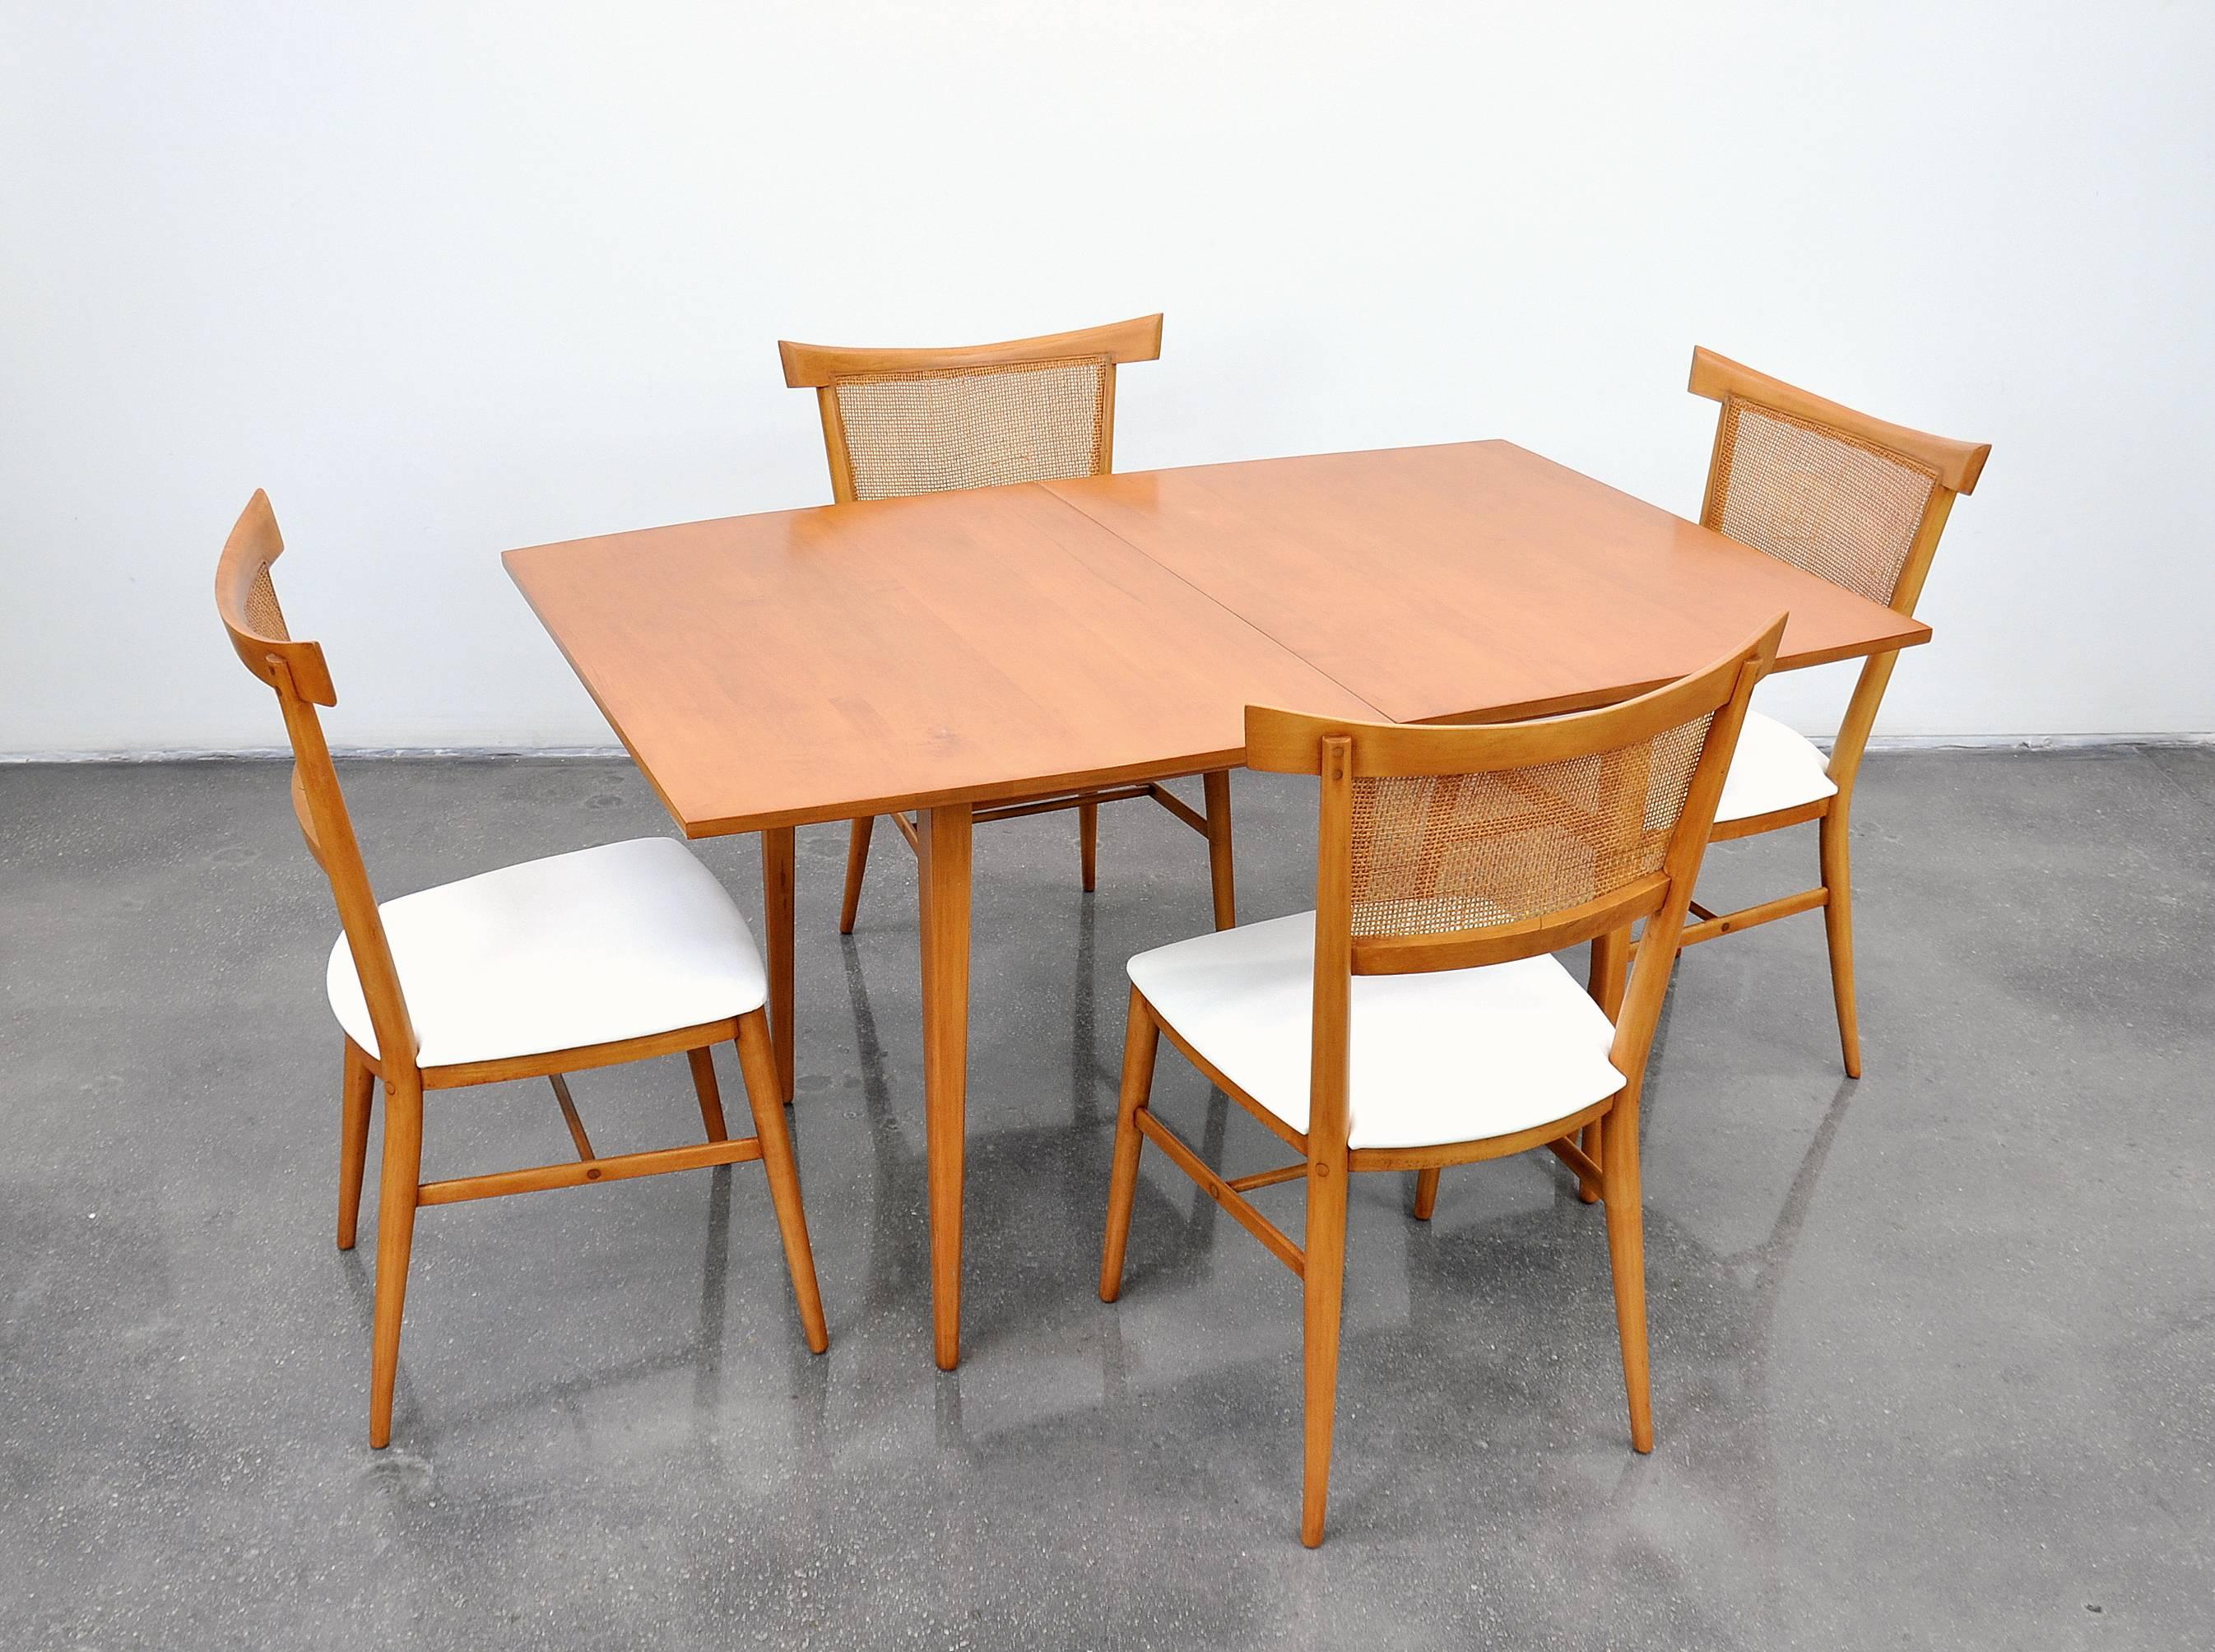 This striking Mid-Century Modern maple dining set was designed by Paul McCobb for the Perimeter Group line in circa 1957 and manufactured by Winchendon Furniture. Completely restored, it features an expandable boat-shaped table and four dining